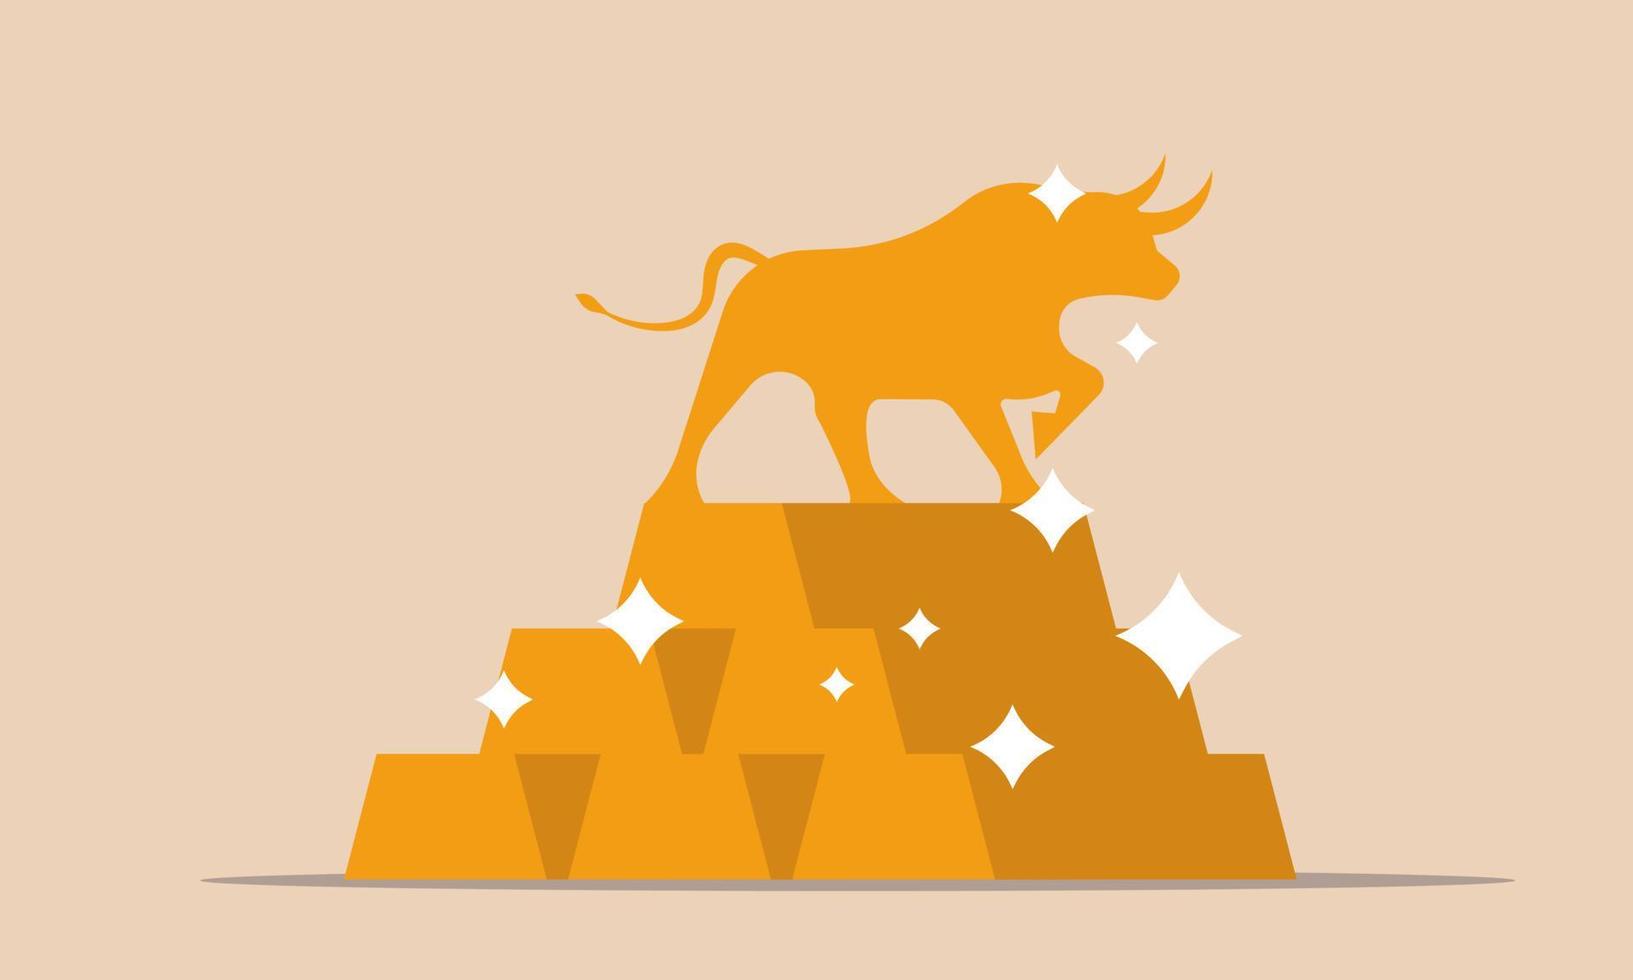 Financial gold bull and positive investment to trading price. Business force to currency money vector illustration concept. Coin treasure and speculation golden capital. Bullion bar and profit market